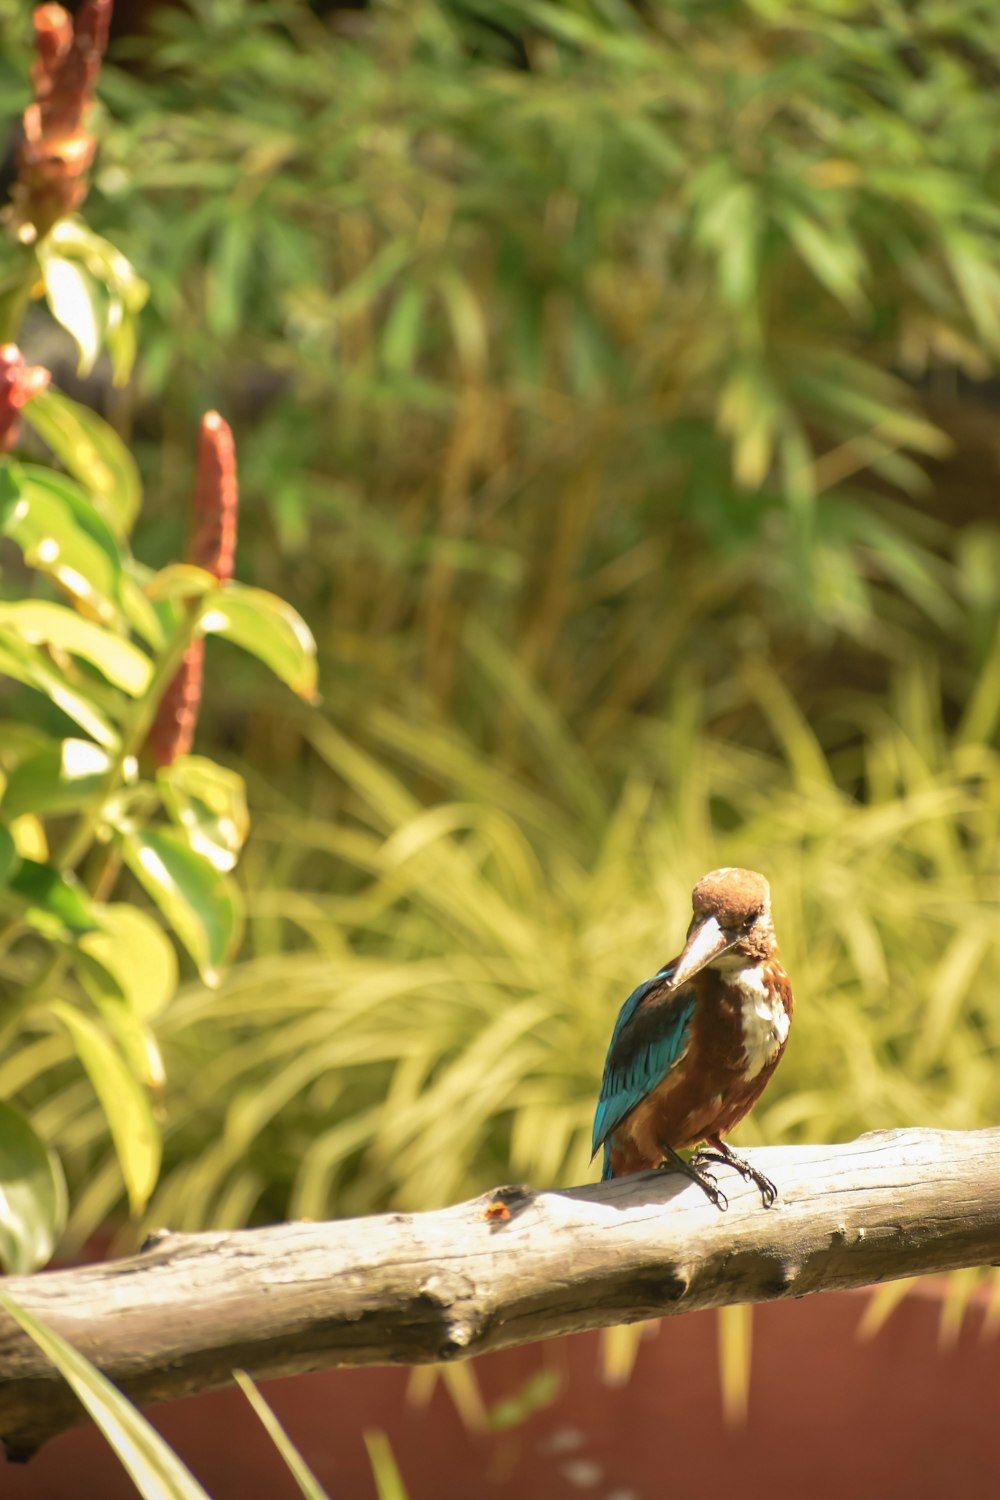 a small bird perched on a wooden branch